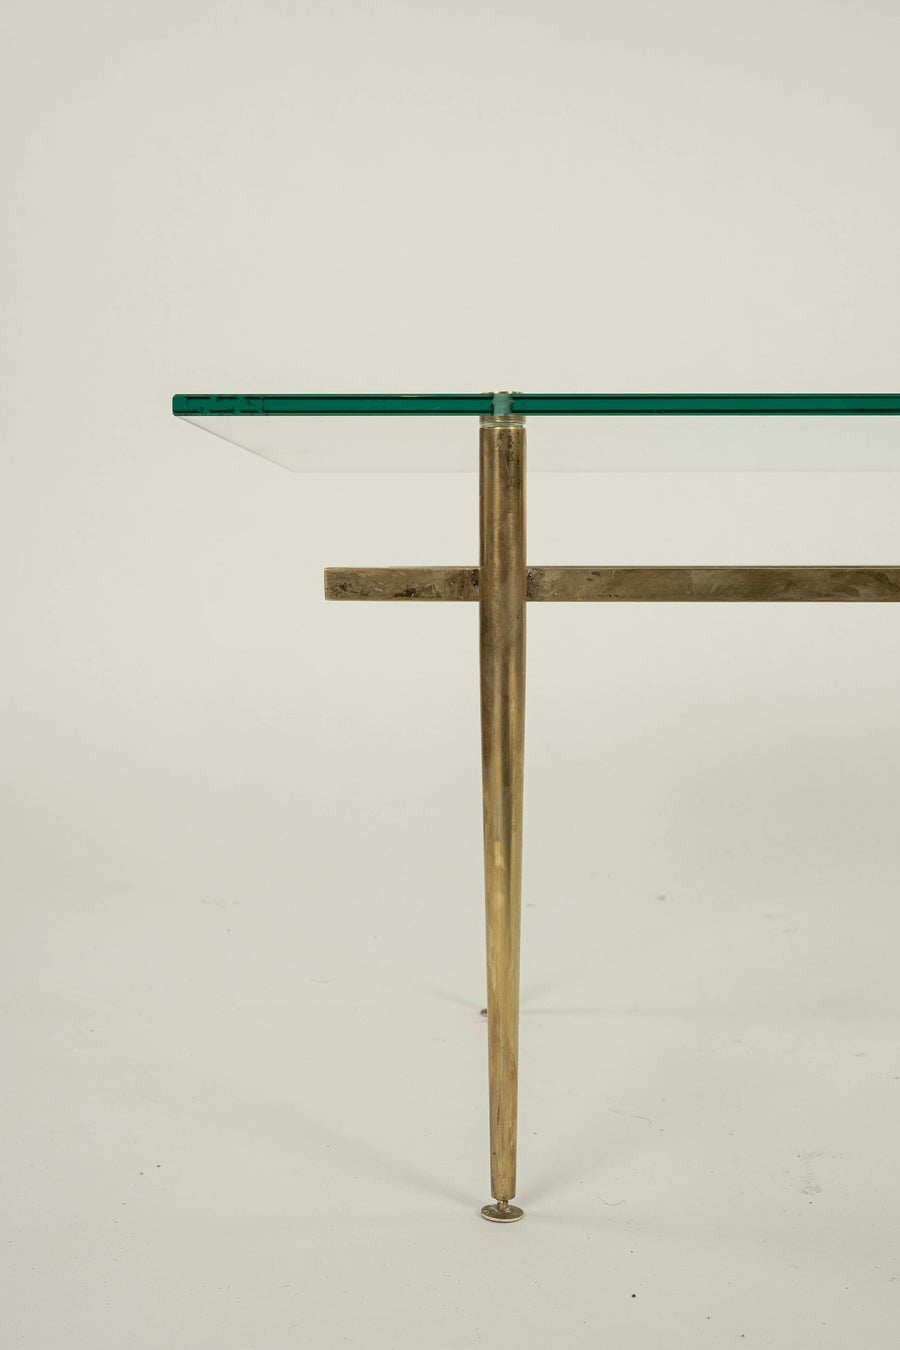 Brass and Glass Cocktail Table